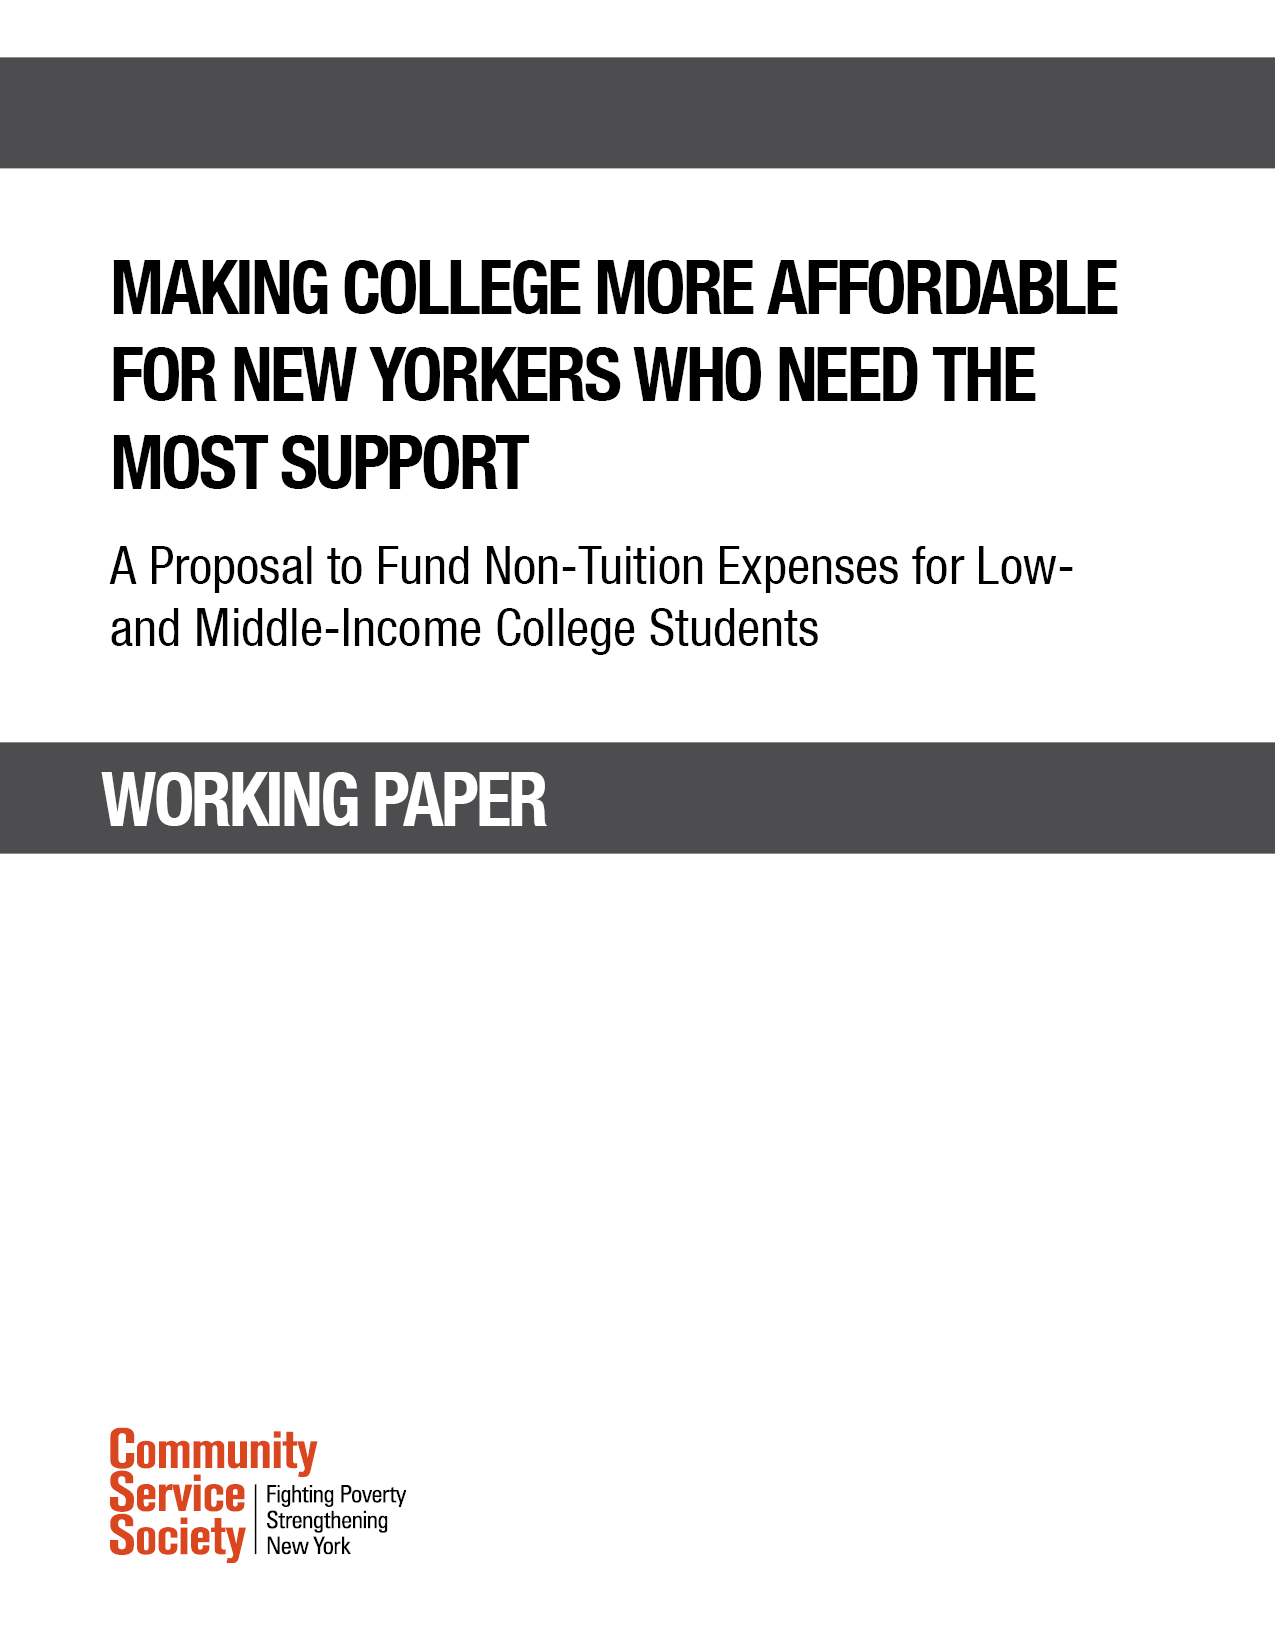 Making College More Affordable for New Yorkers Who Need the Most Support